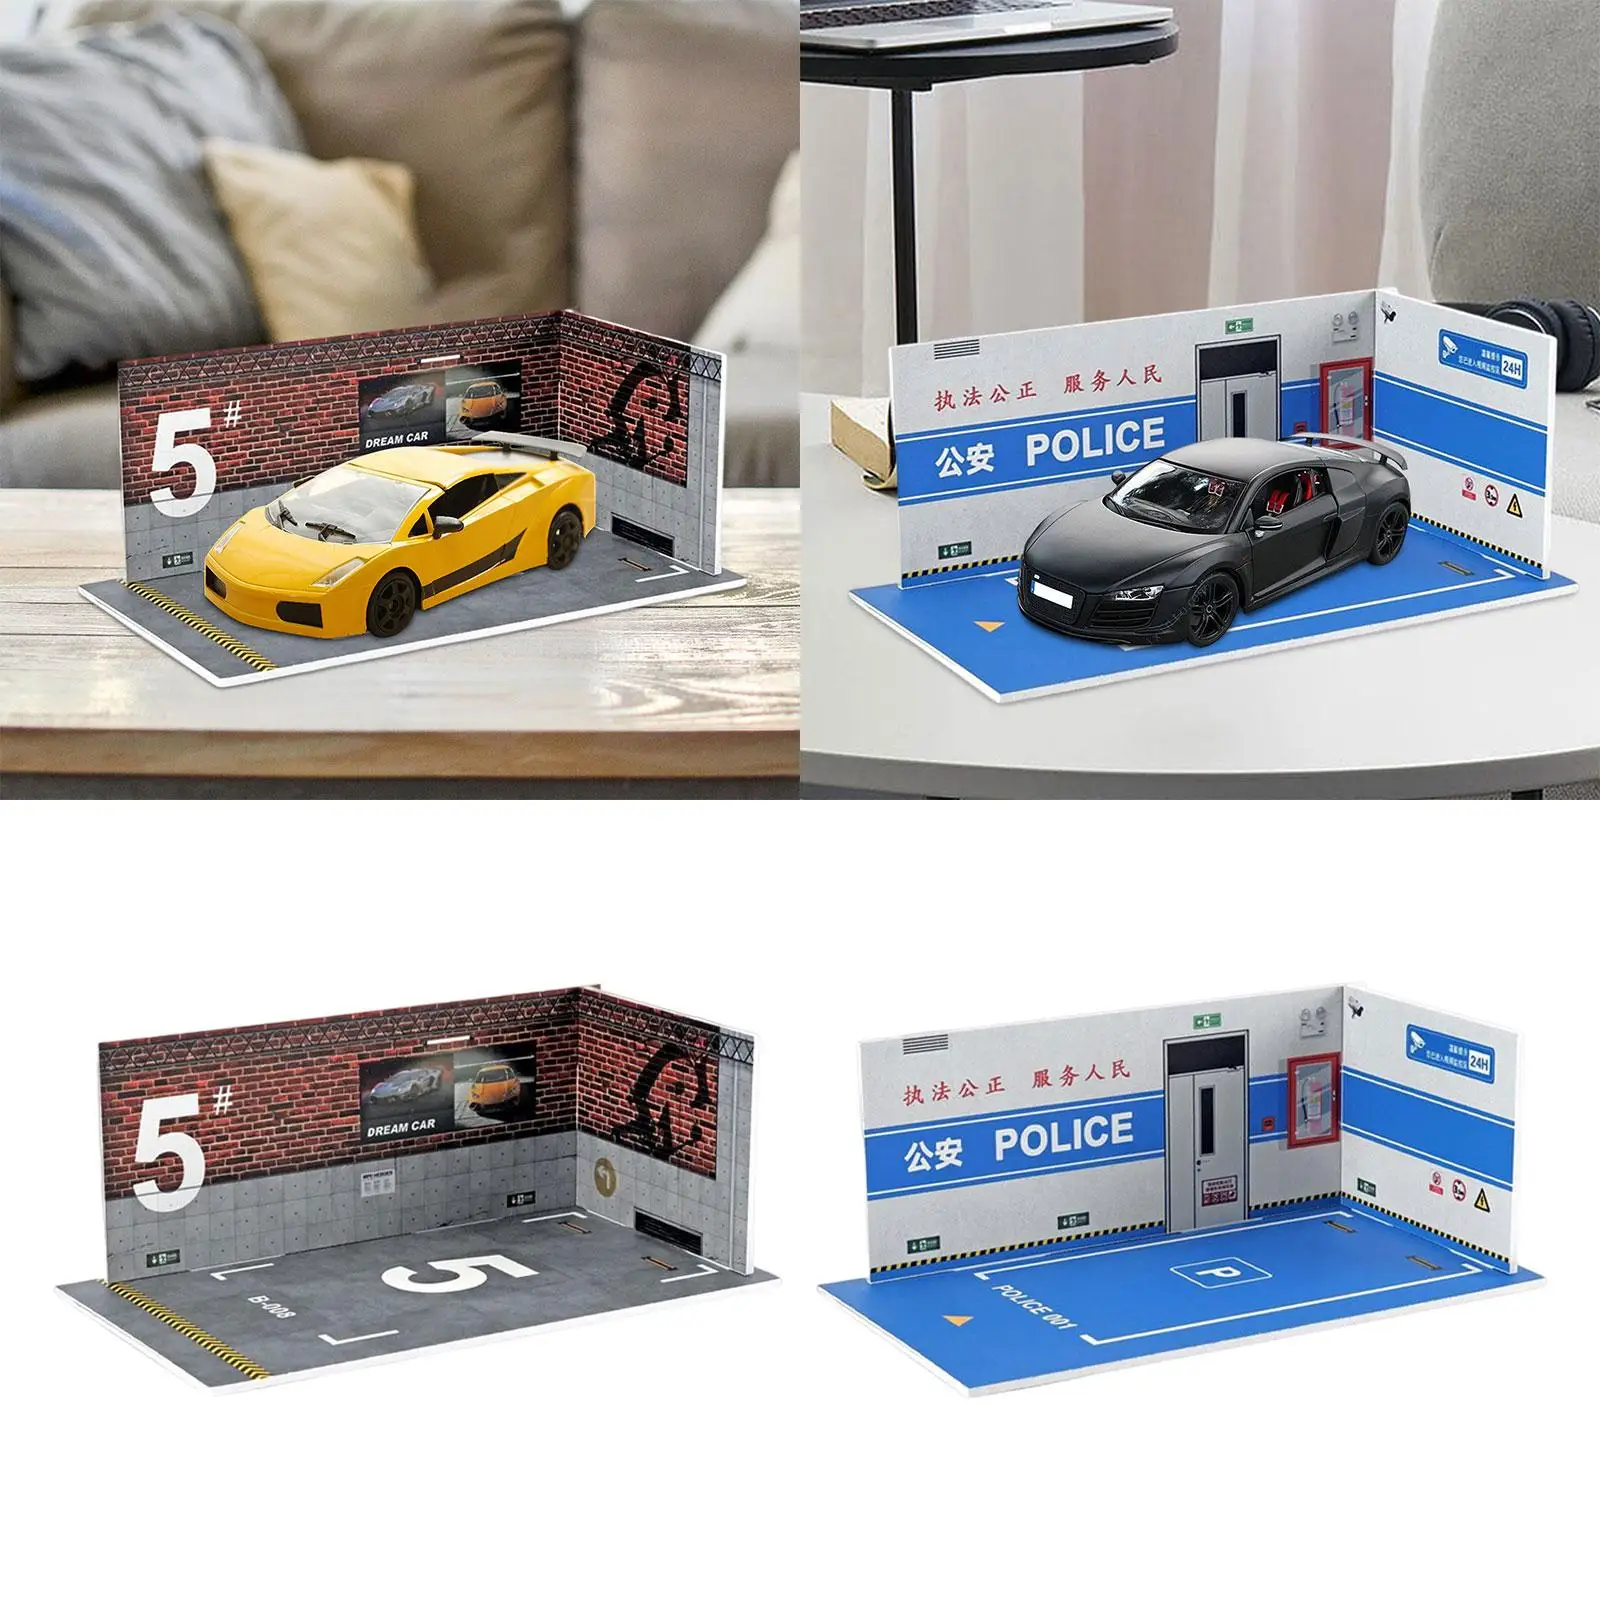 1/24 Car Garage Diorama Model Decoration Layout Models Scenery for Home Micro Landscape Diorama Sand Table Collection Gifts